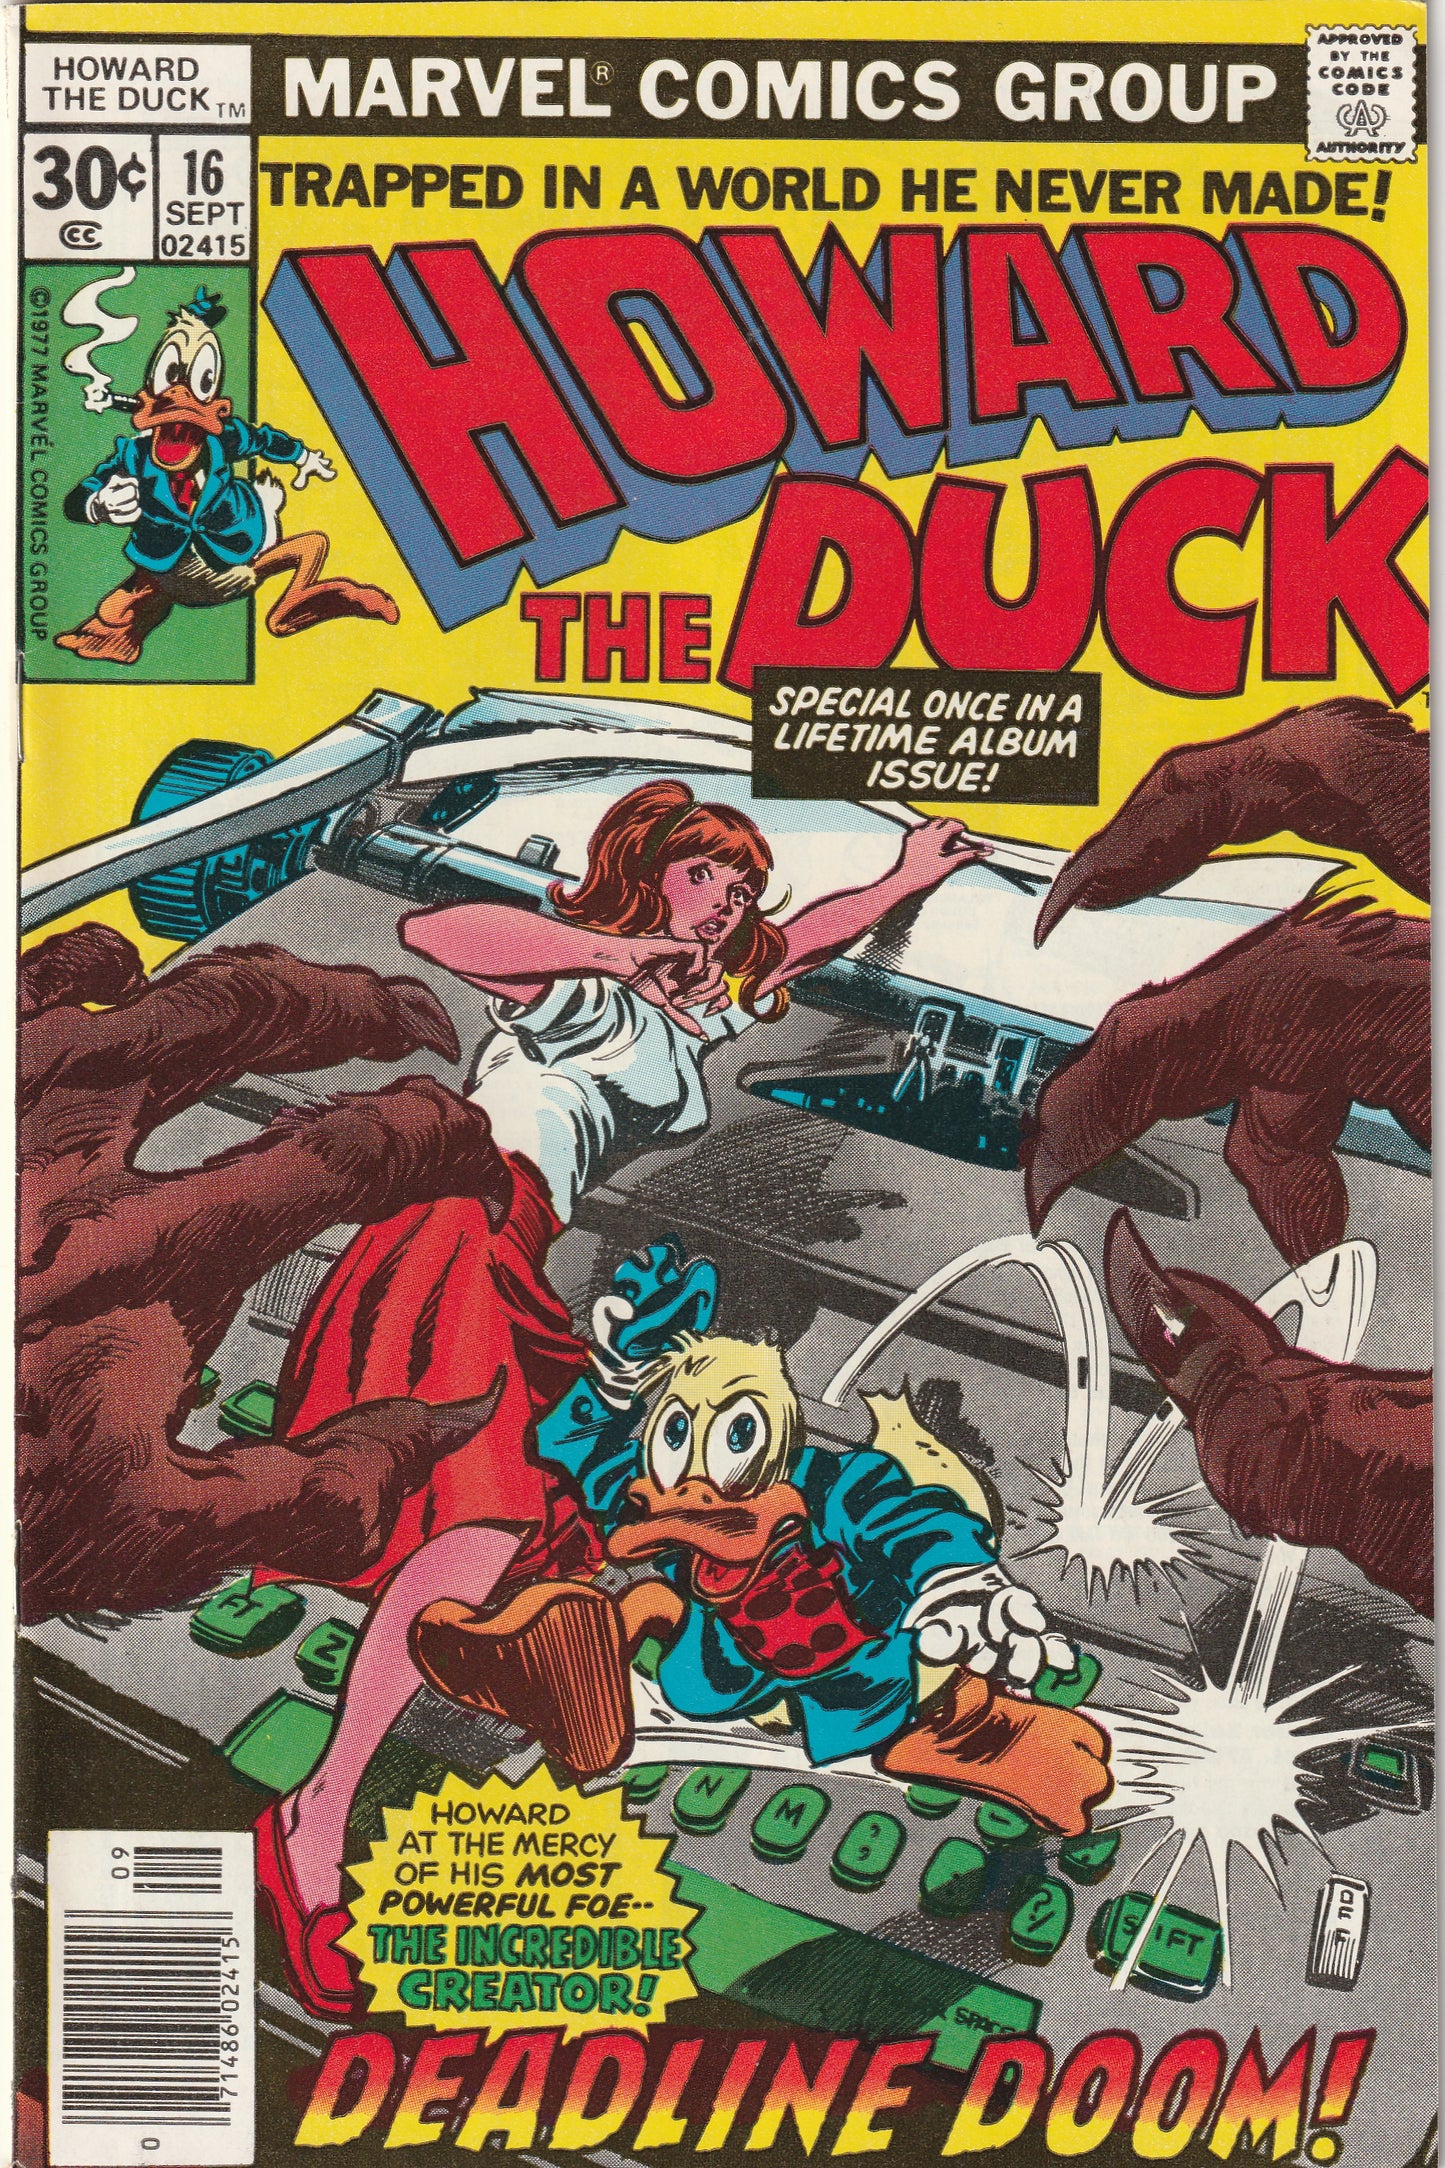 Howard the Duck #16 (1977) - Album issue